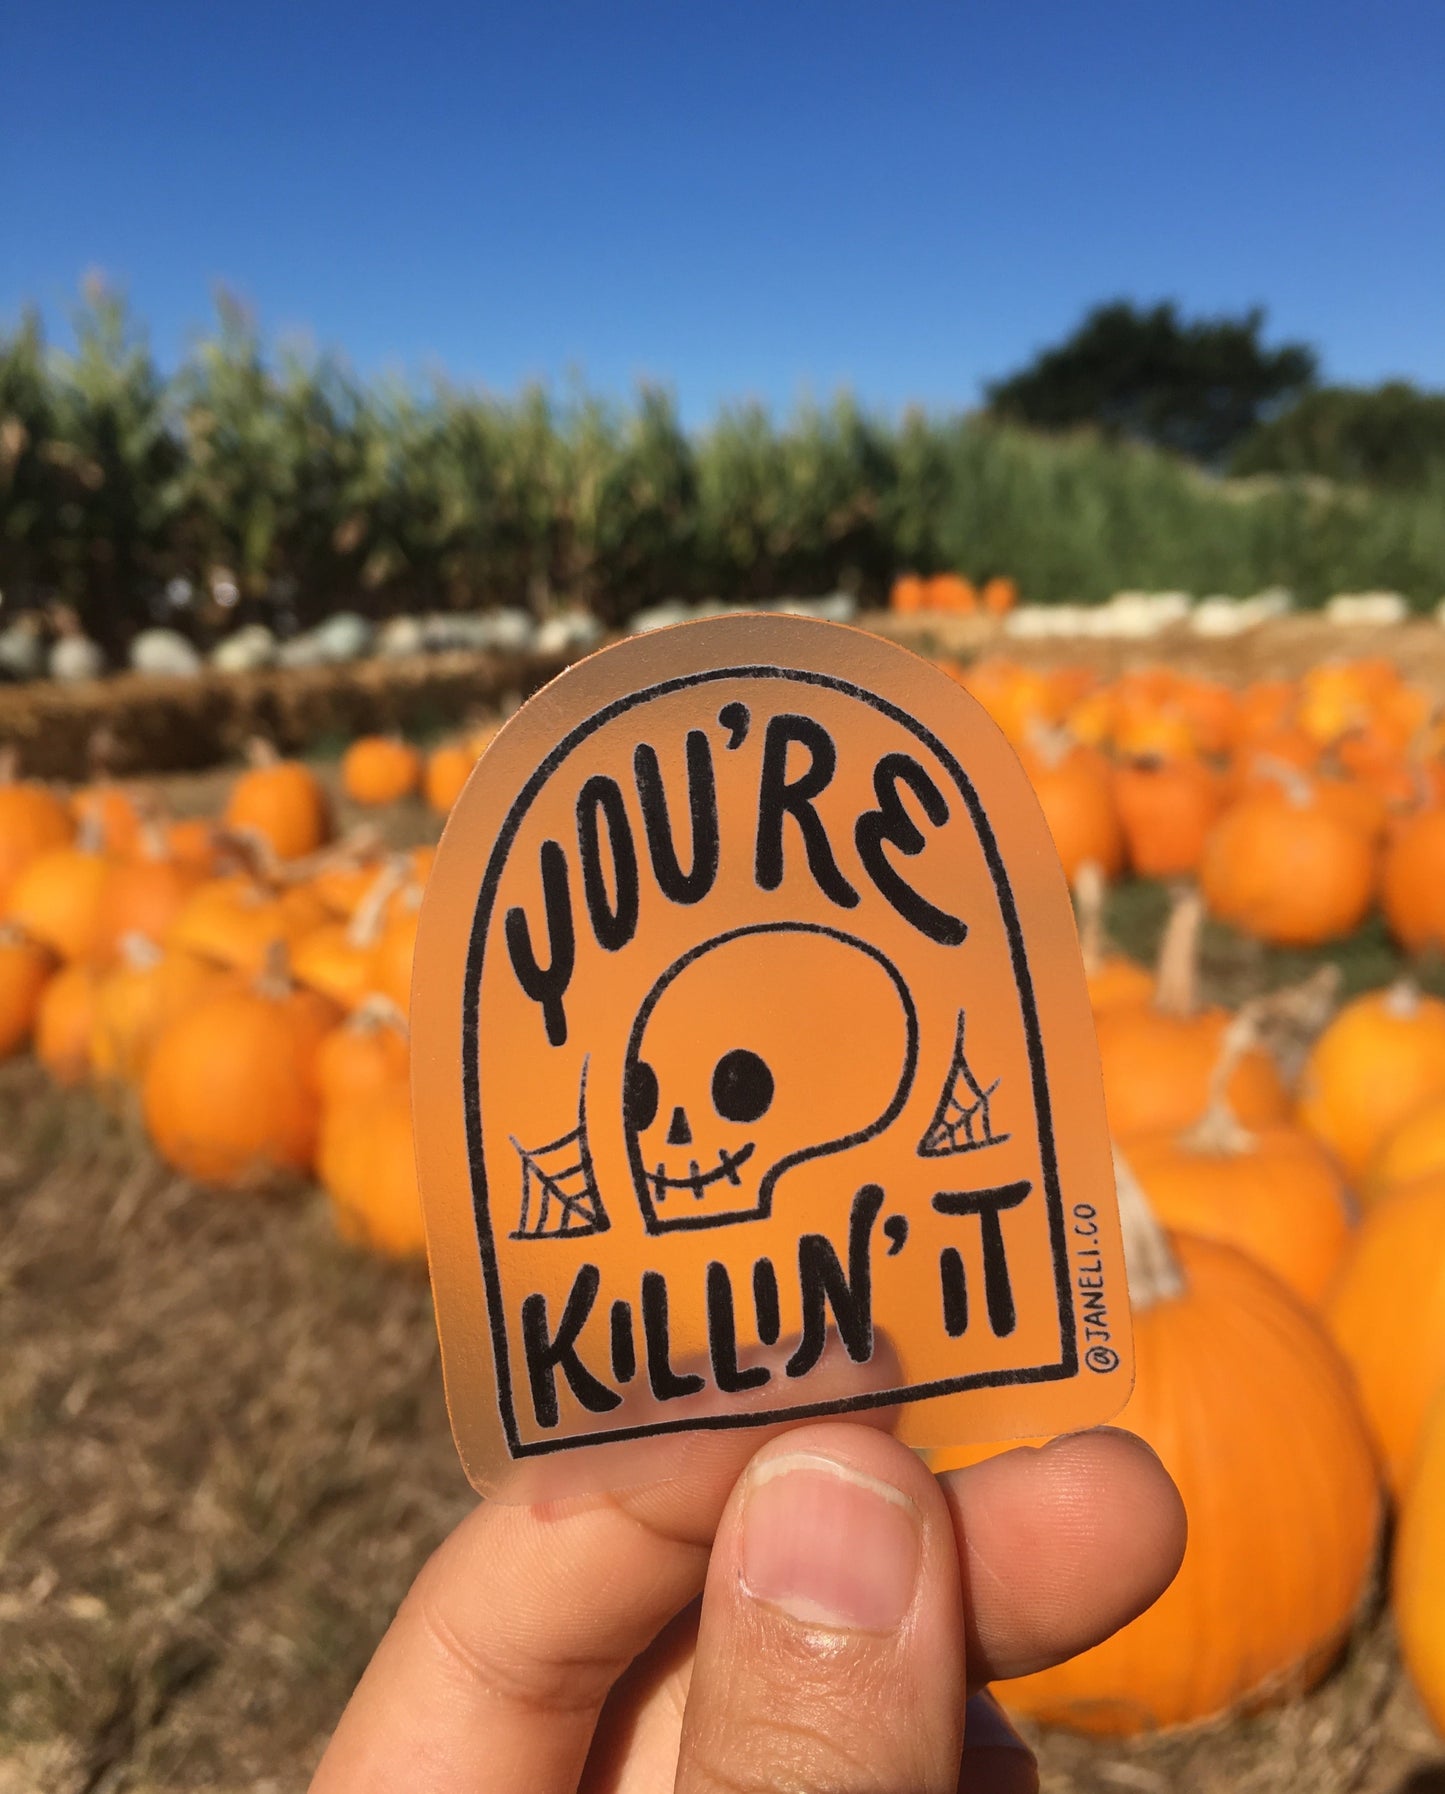 A hand holding a clear JaneLi.Co sticker that says "You're Killin' It" in the shape of a tombstone with a skull in it in front of a pumpkin patch.